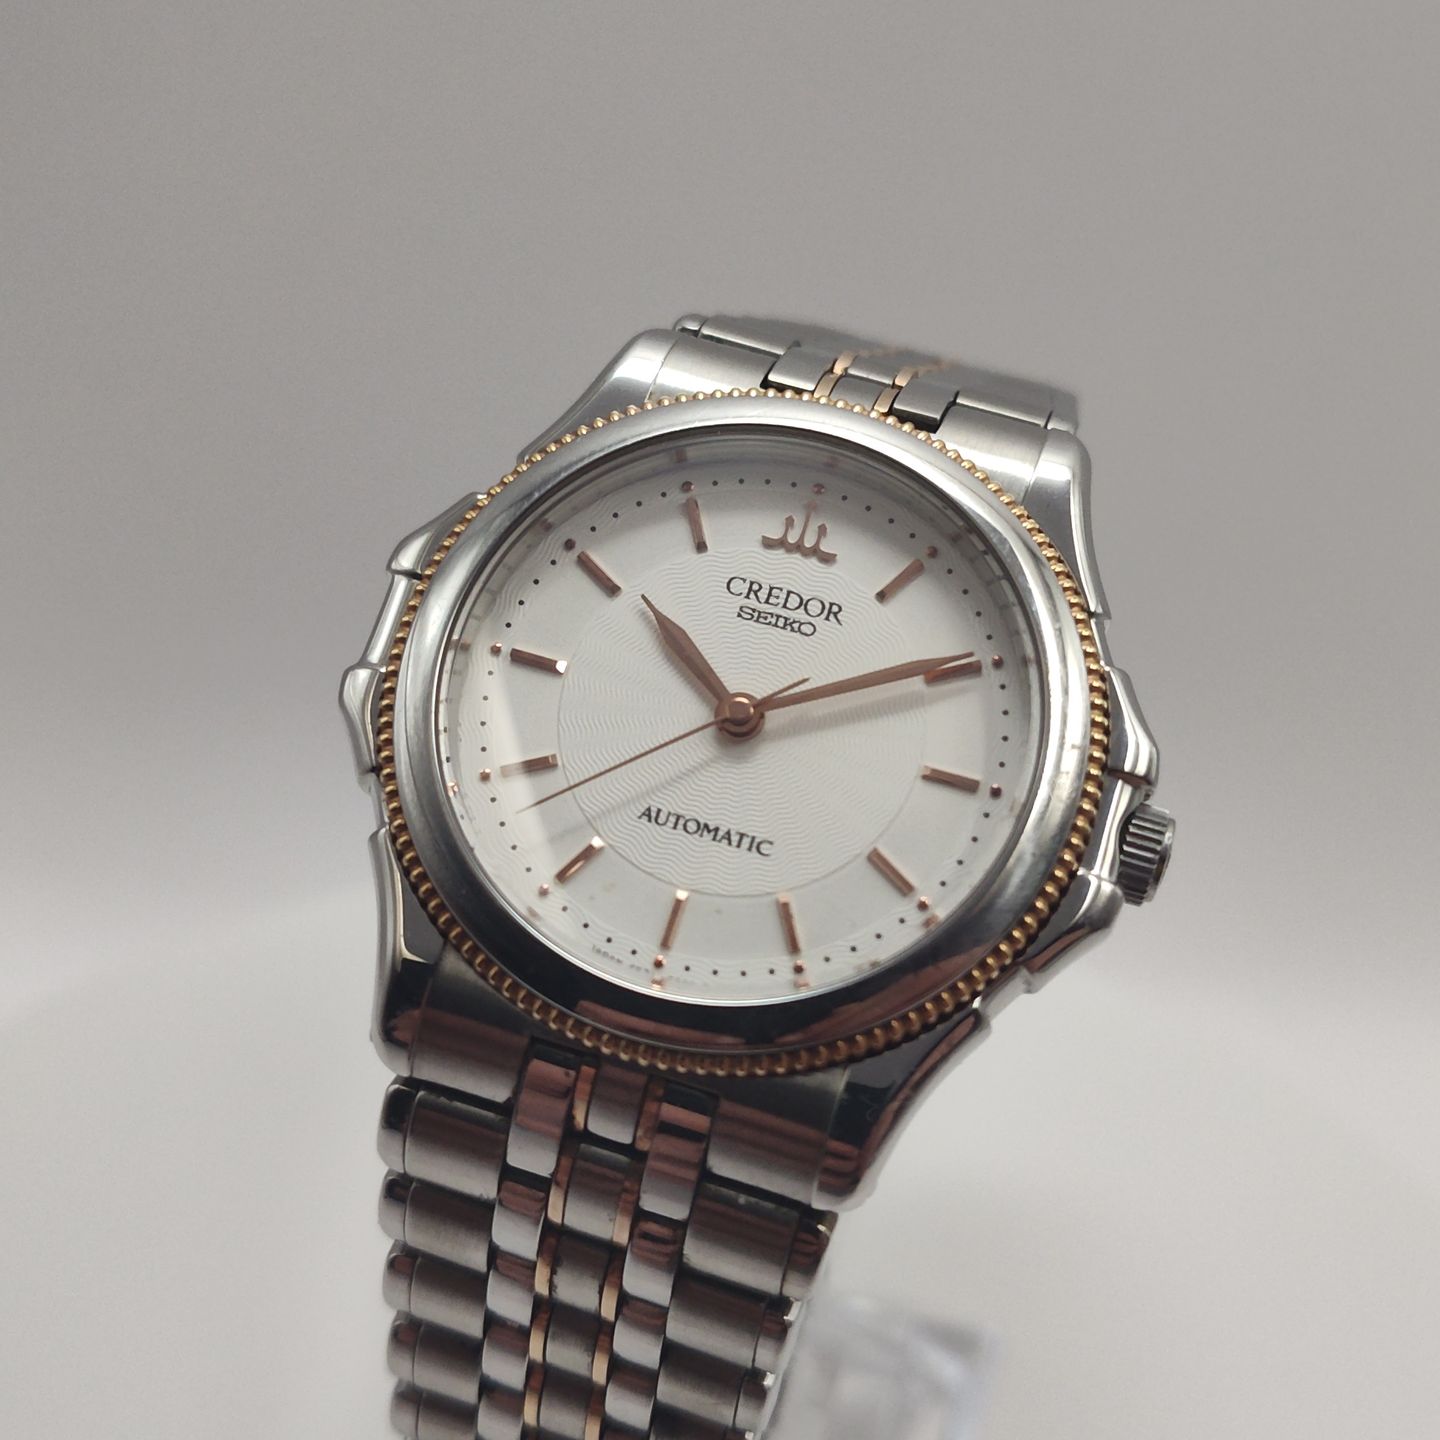 Seiko Credor Credor Seiko Automatic 4S71-6A10 Limited Edition 300 Ultra rare 18KT / Steel Circa 1997 Papers (1997) - White dial 38 mm Gold/Steel case (1/7)